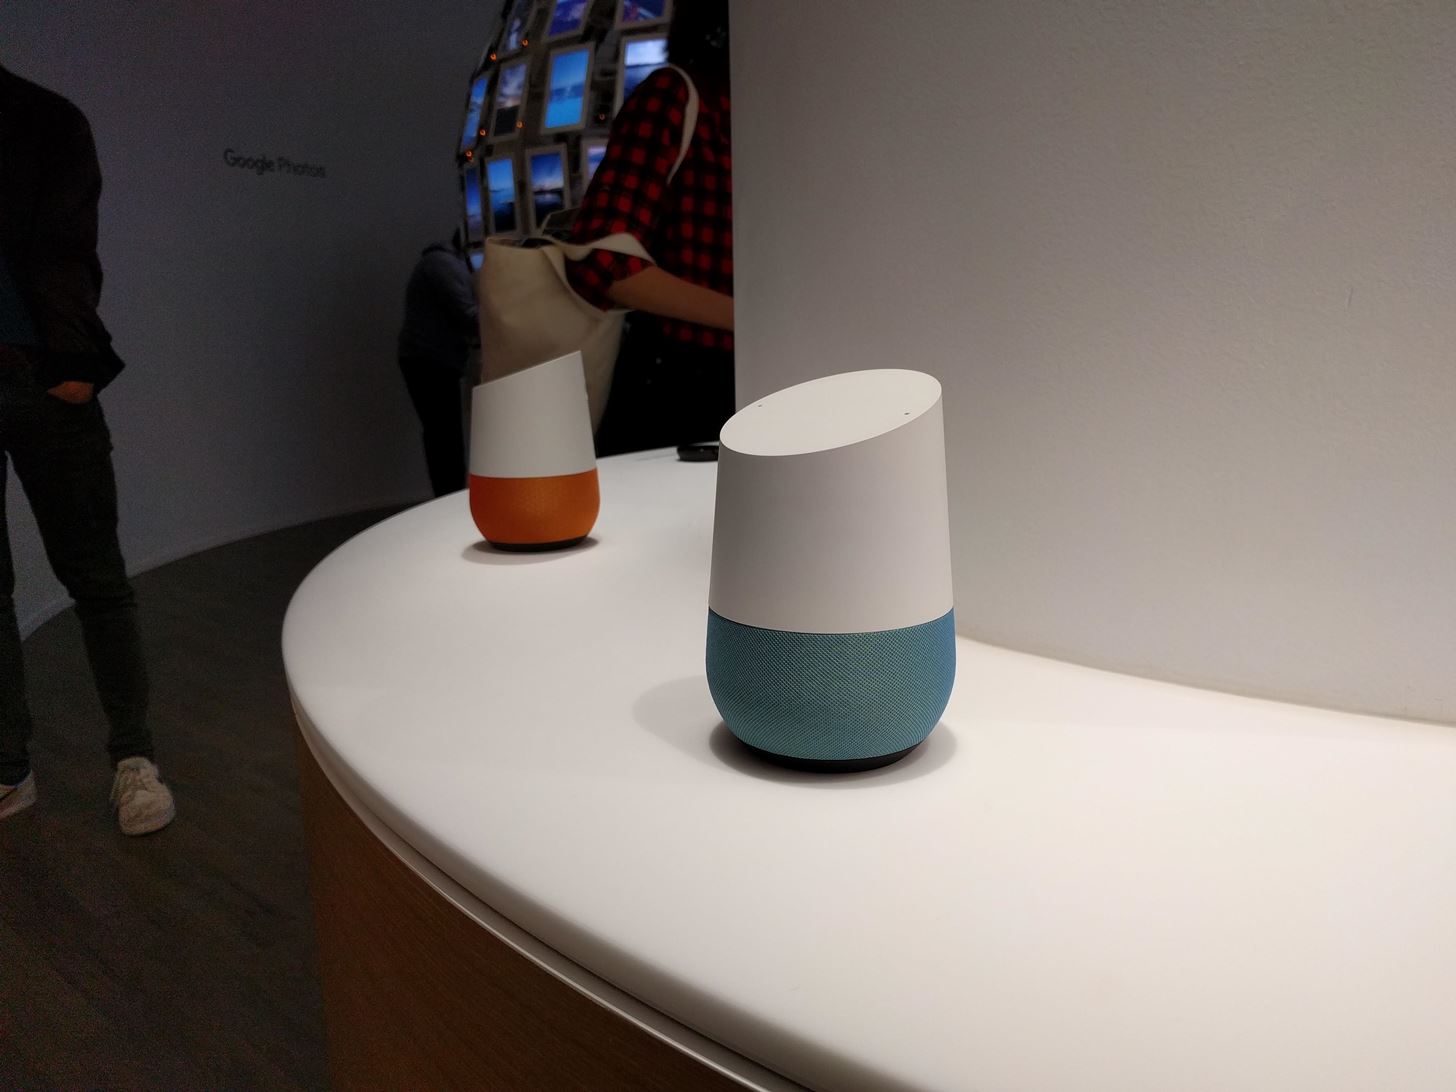 The Made by Google Pop-Up Shop in NYC Is Like an Apple Store, but with Personality